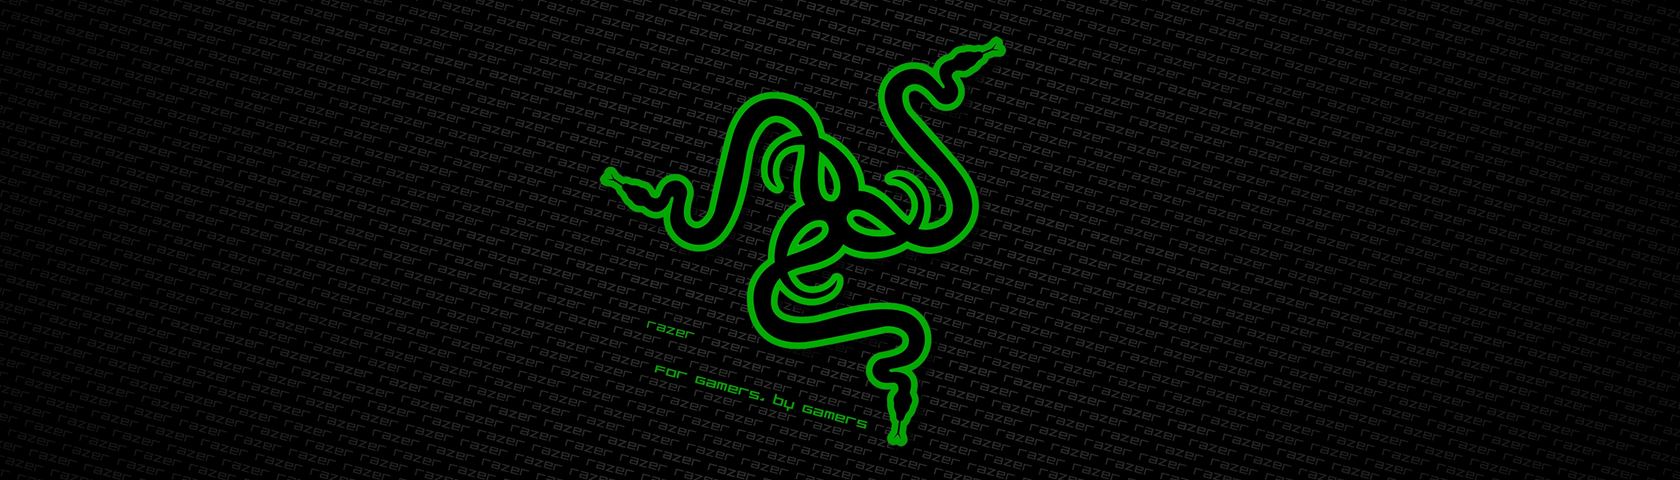 Razer Wallpaper Image Wallpaperfusion By Binary Fortress Software